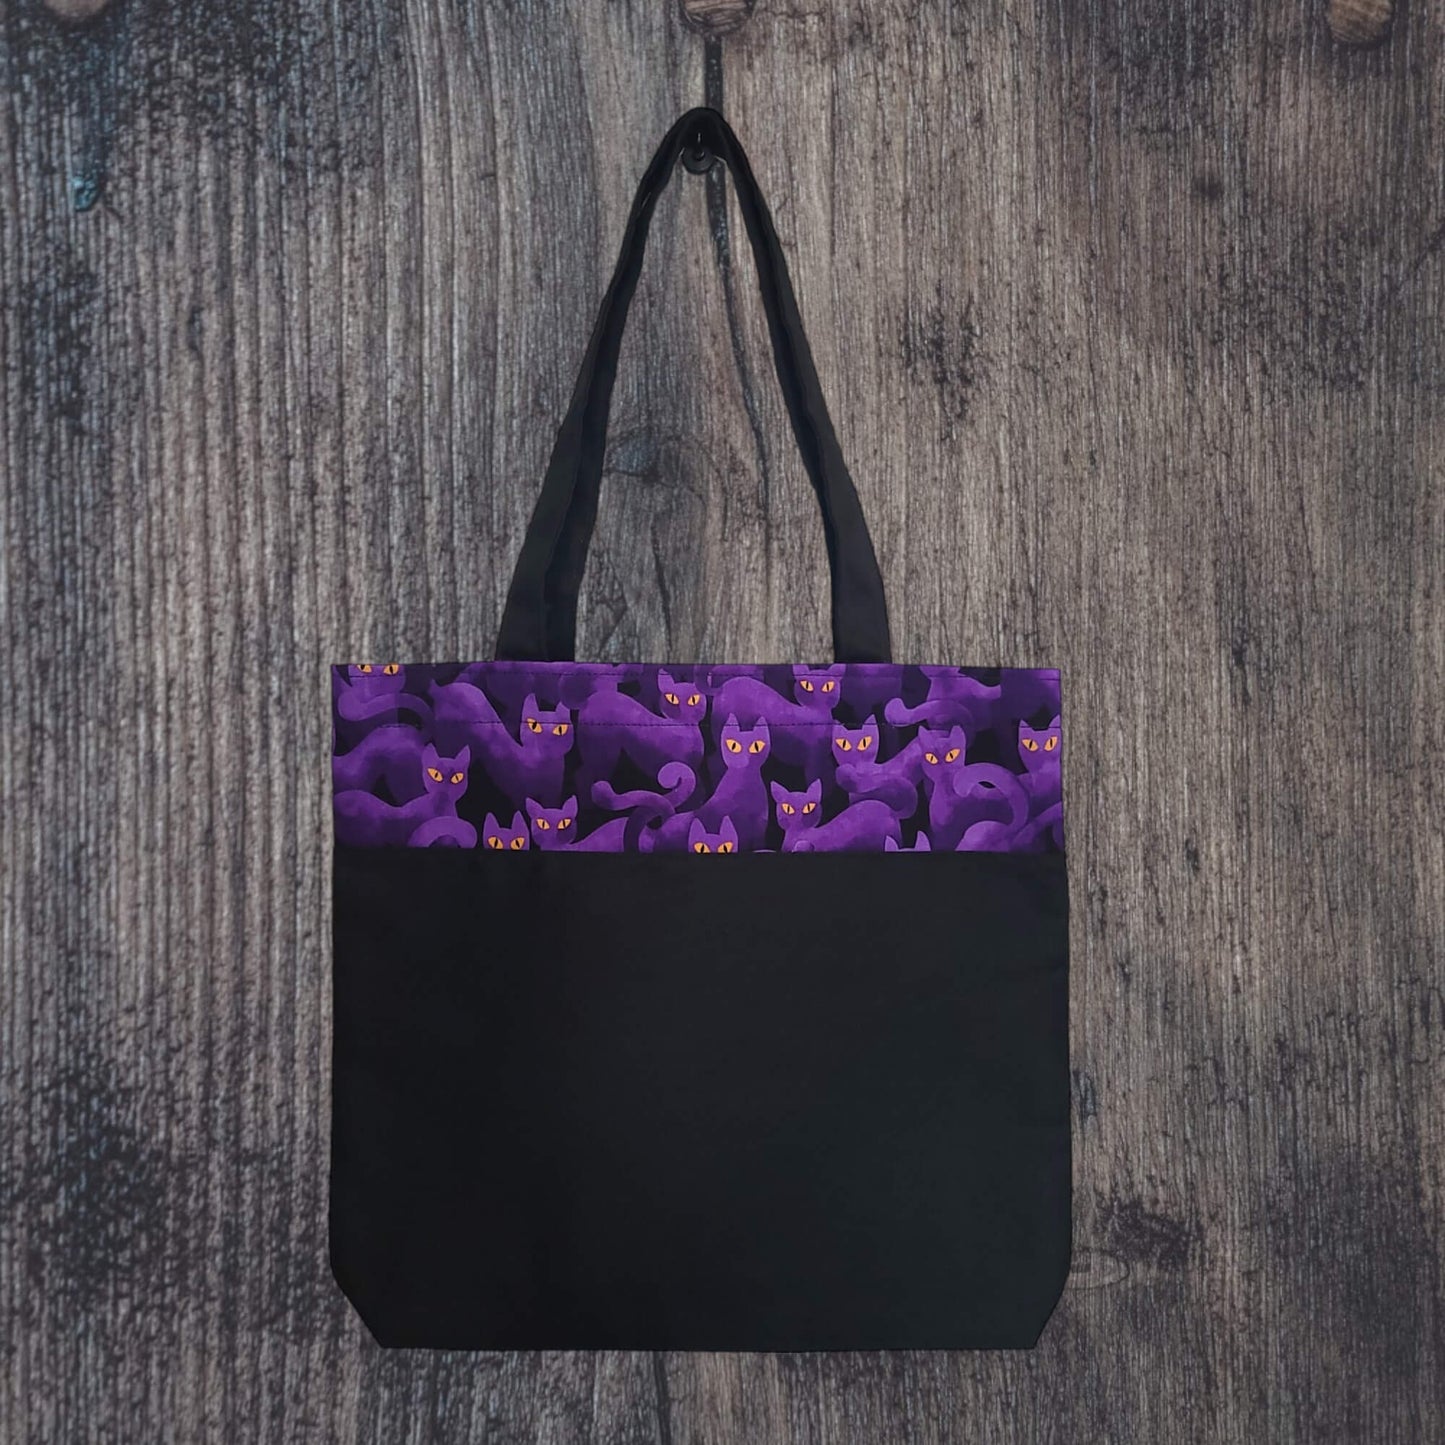 our accent tote bag featuring our Familiars Gaze pattern.